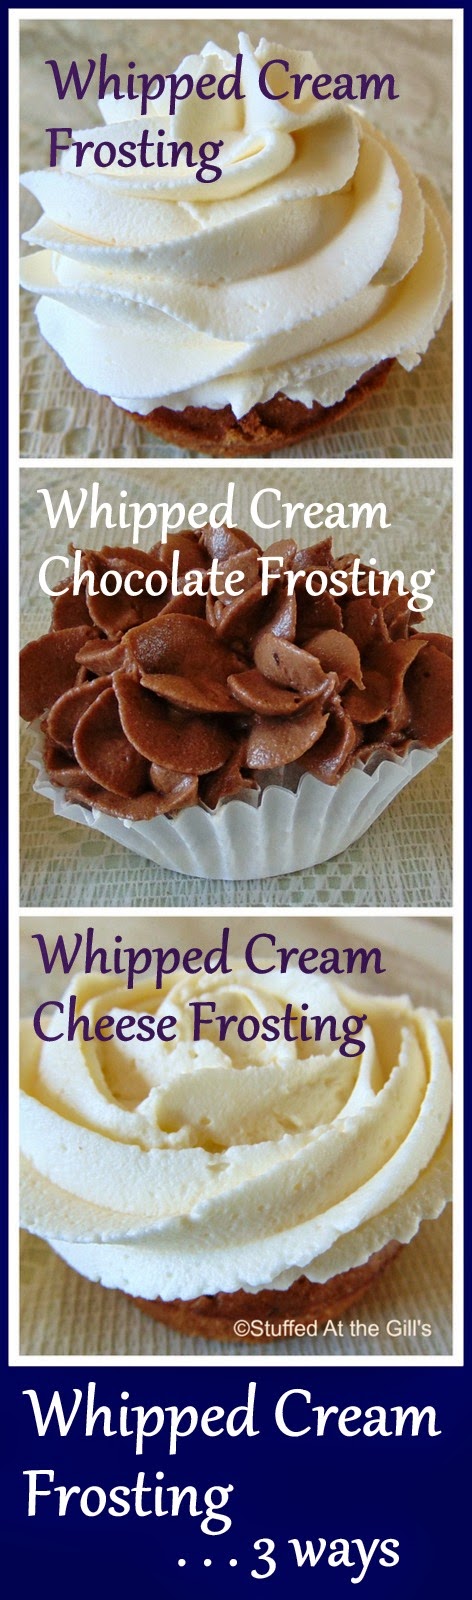 Stuffed At the Gill's: Whipped Cream Frosting. . . 3 Ways